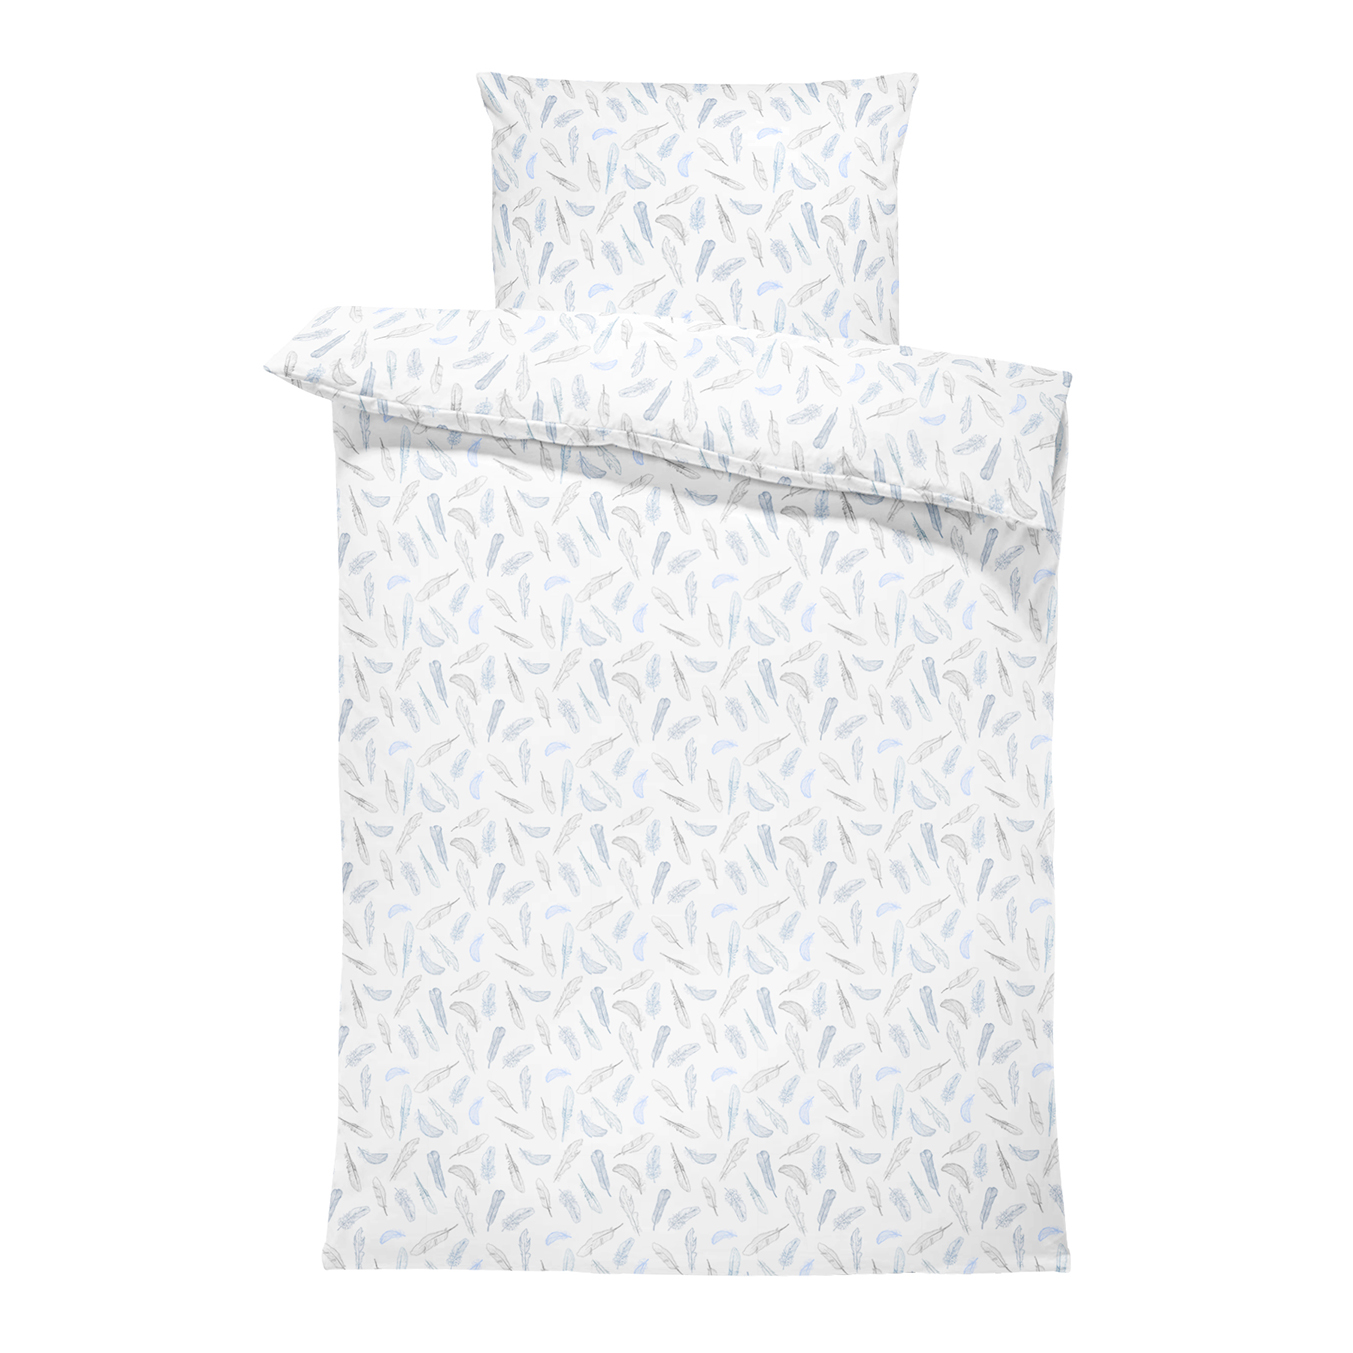 Bamboo bedding cover set - Heavenly feathers